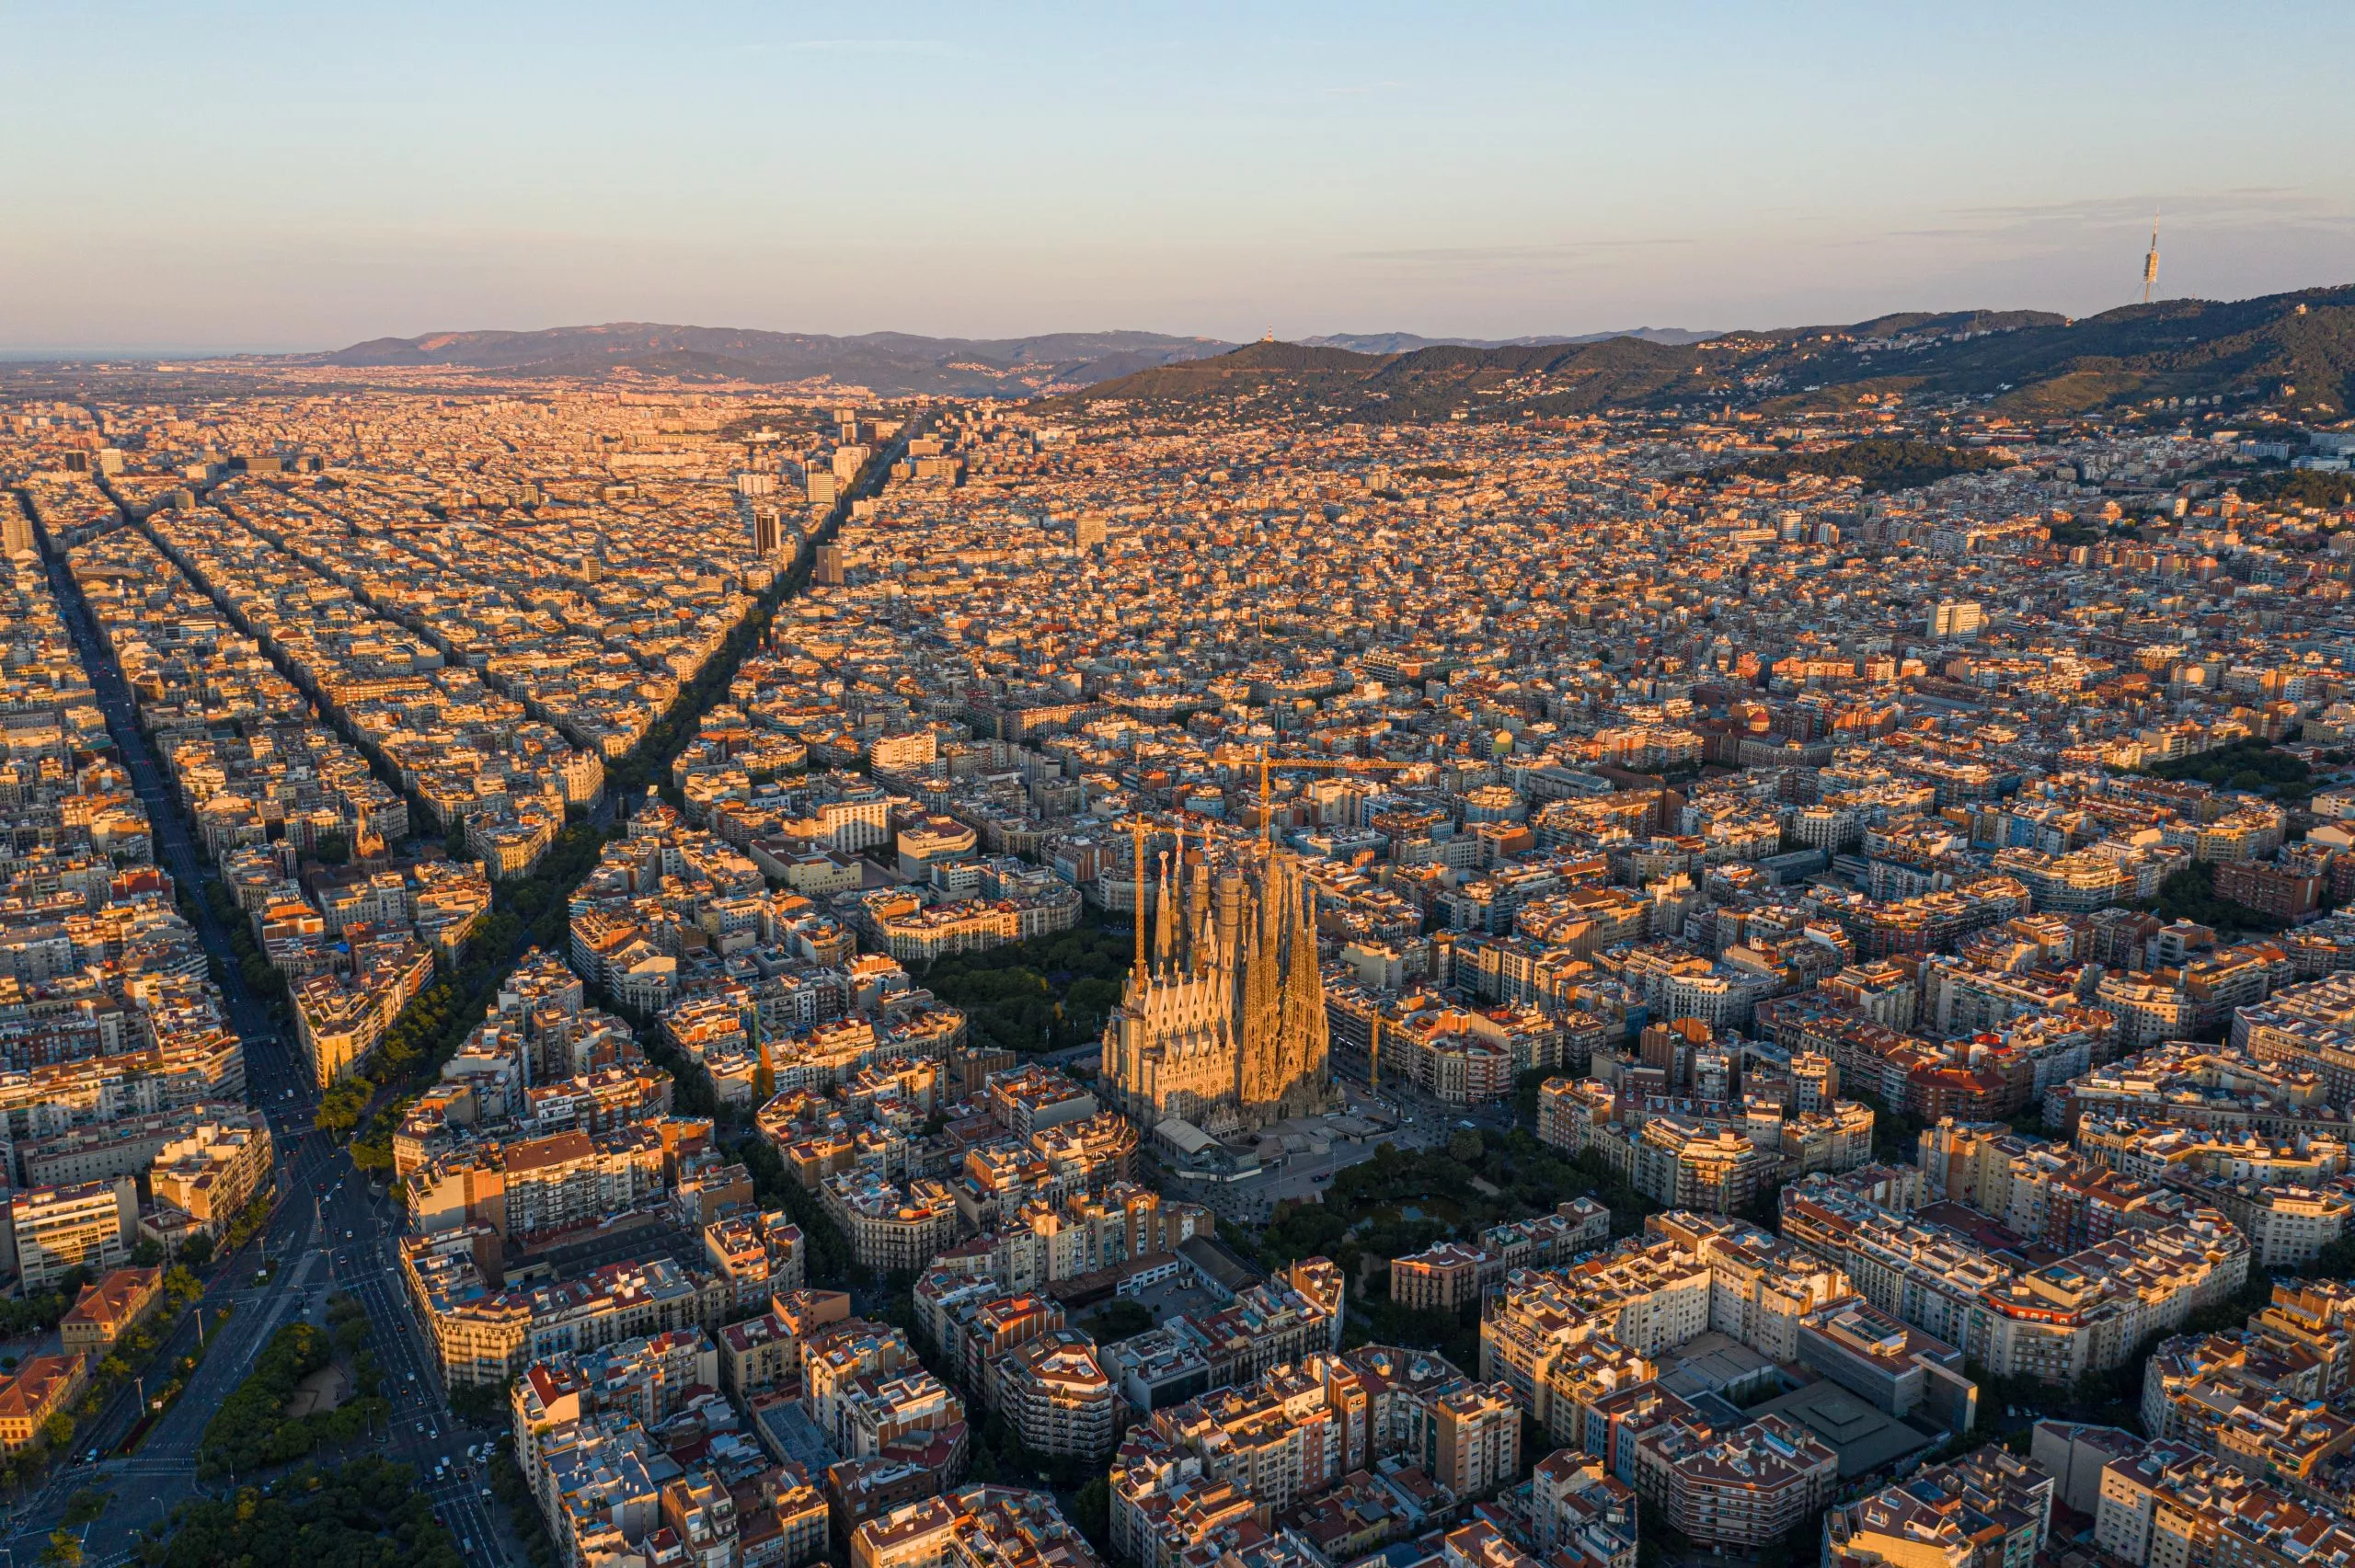 aerial view of Barcelona at first light on the famous Sagrada familia